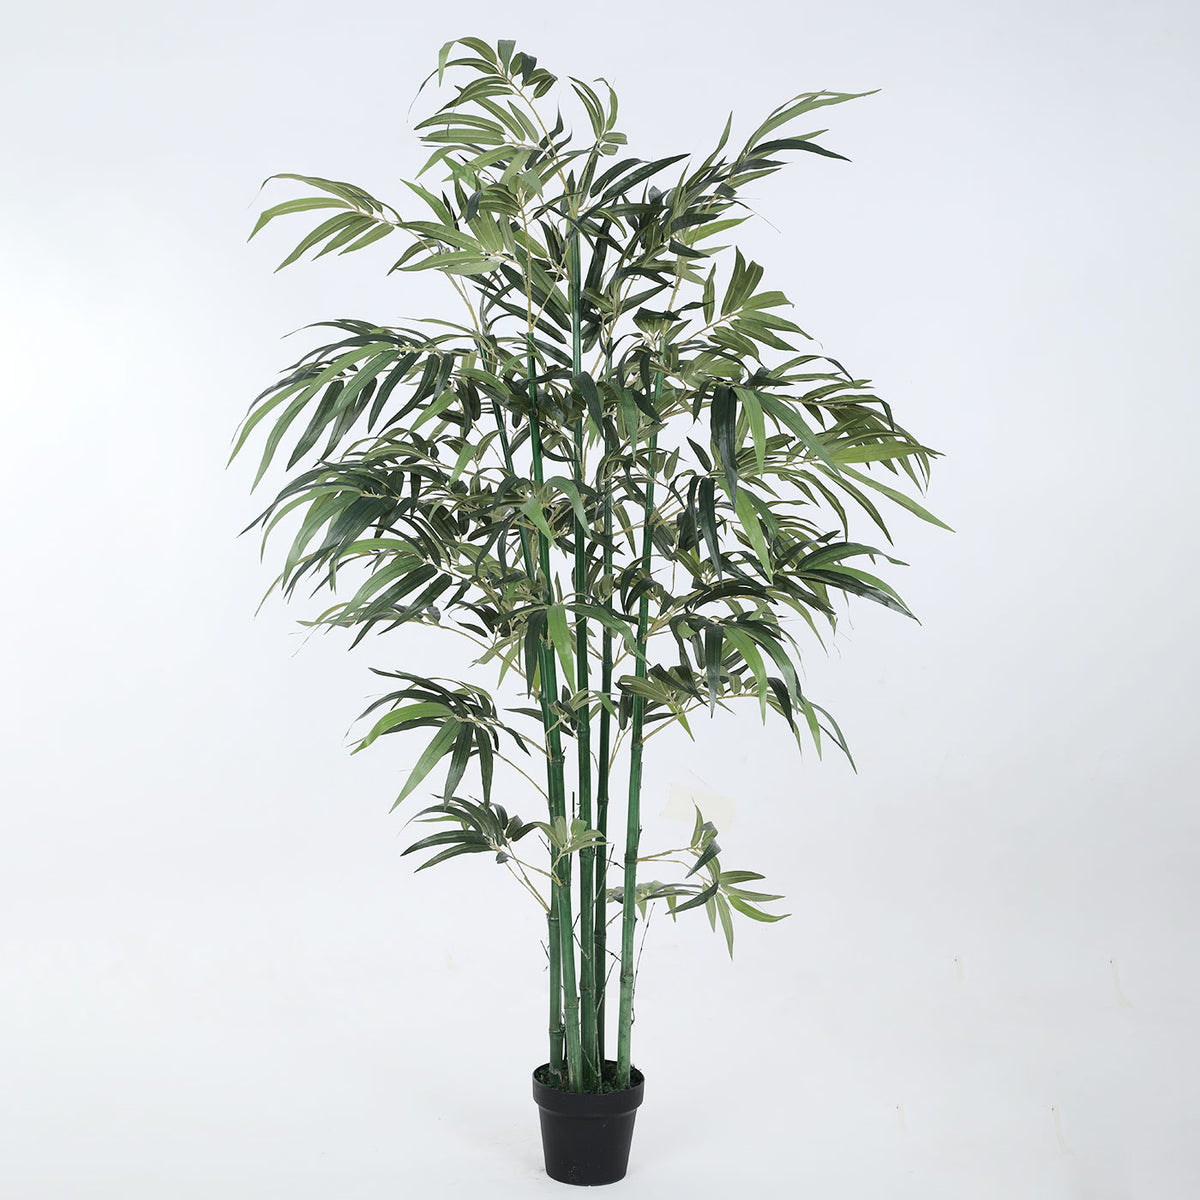 Artificial Green Bamboo Plant for Home Decor/Office Decor/Gifting | Natural Looking Indoor Plant (With Pot, 180 cm)